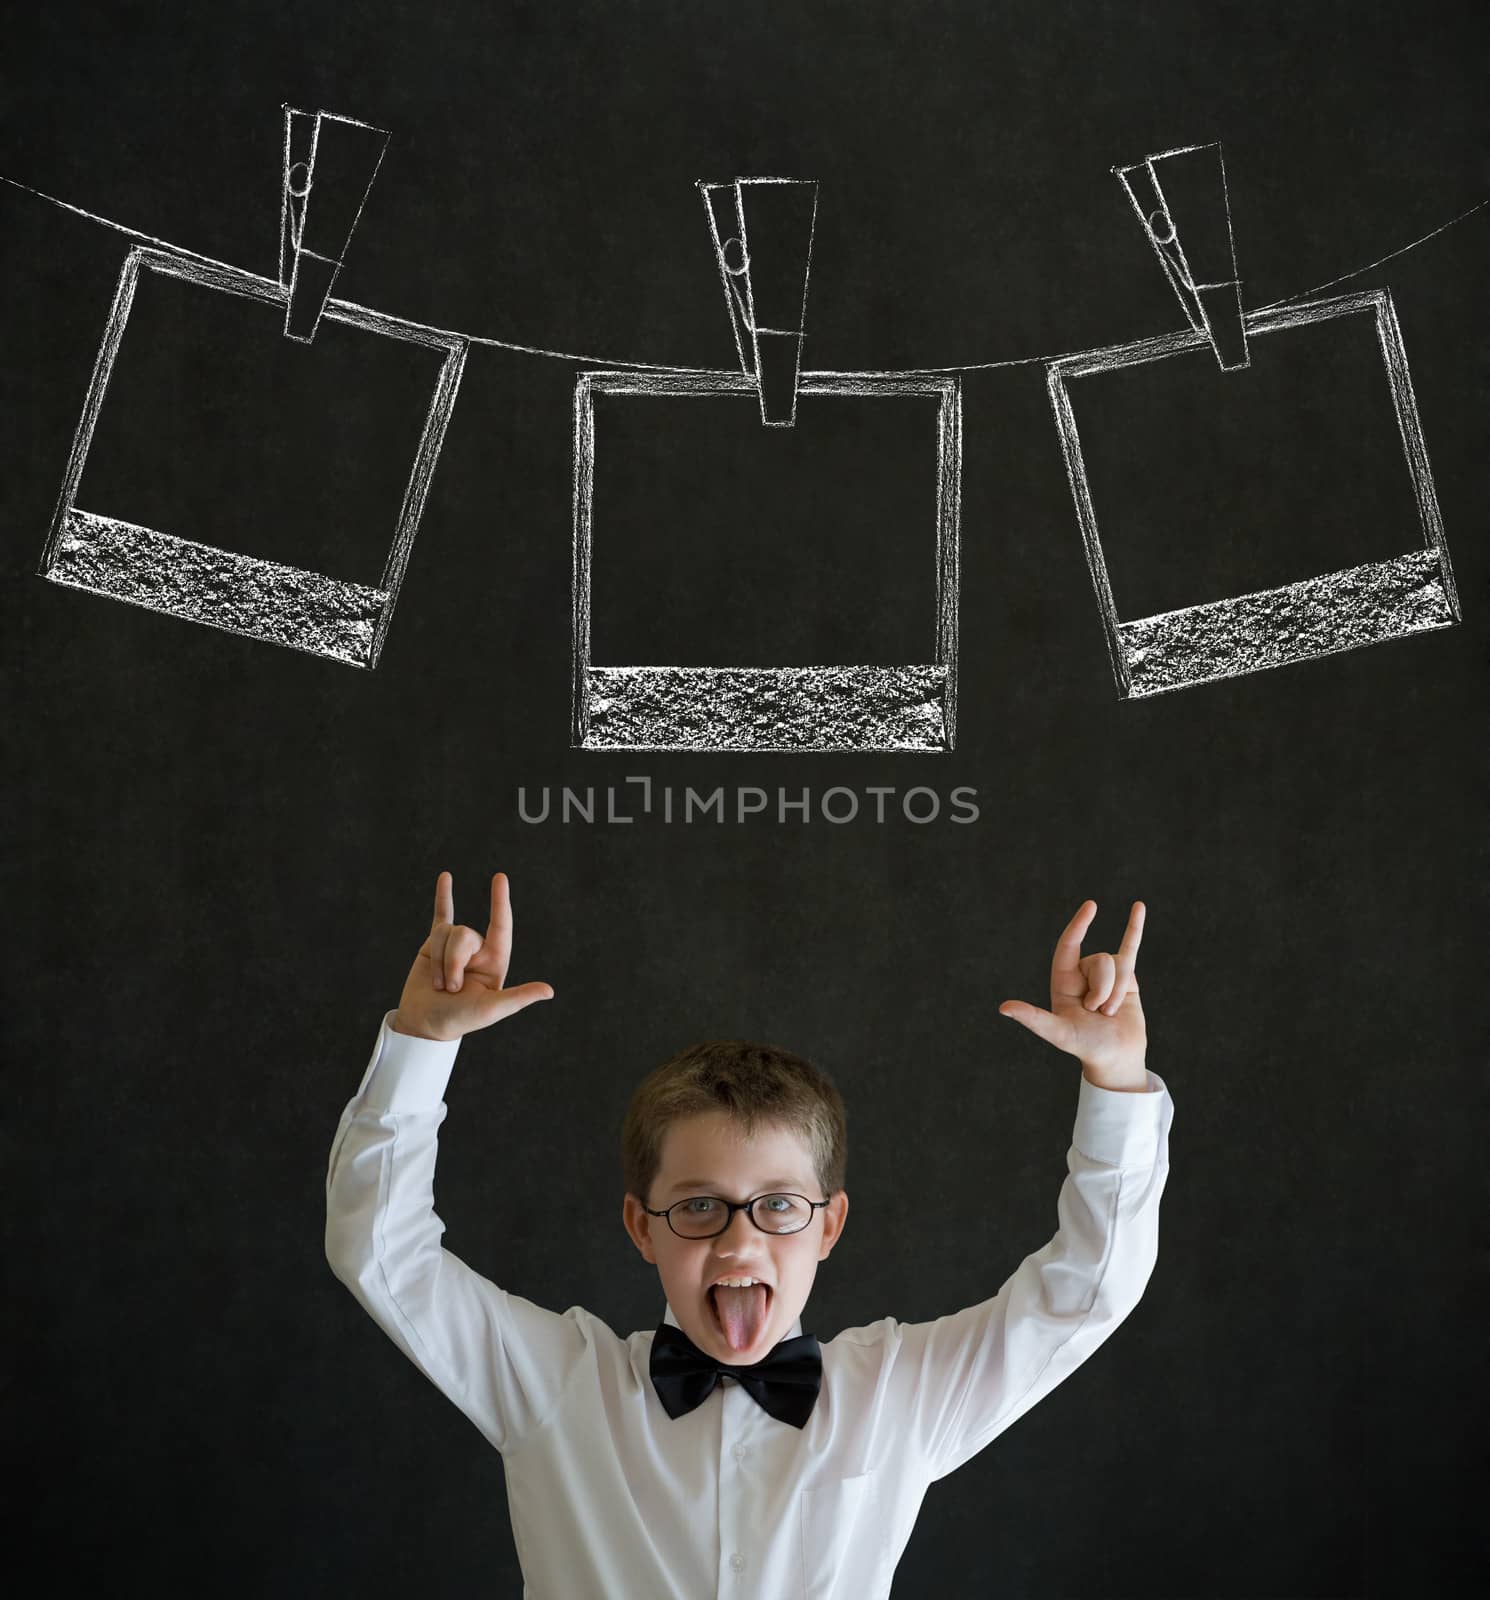 Knowledge rocks boy dressed up as business man with hanging instant photograph on blackboard background